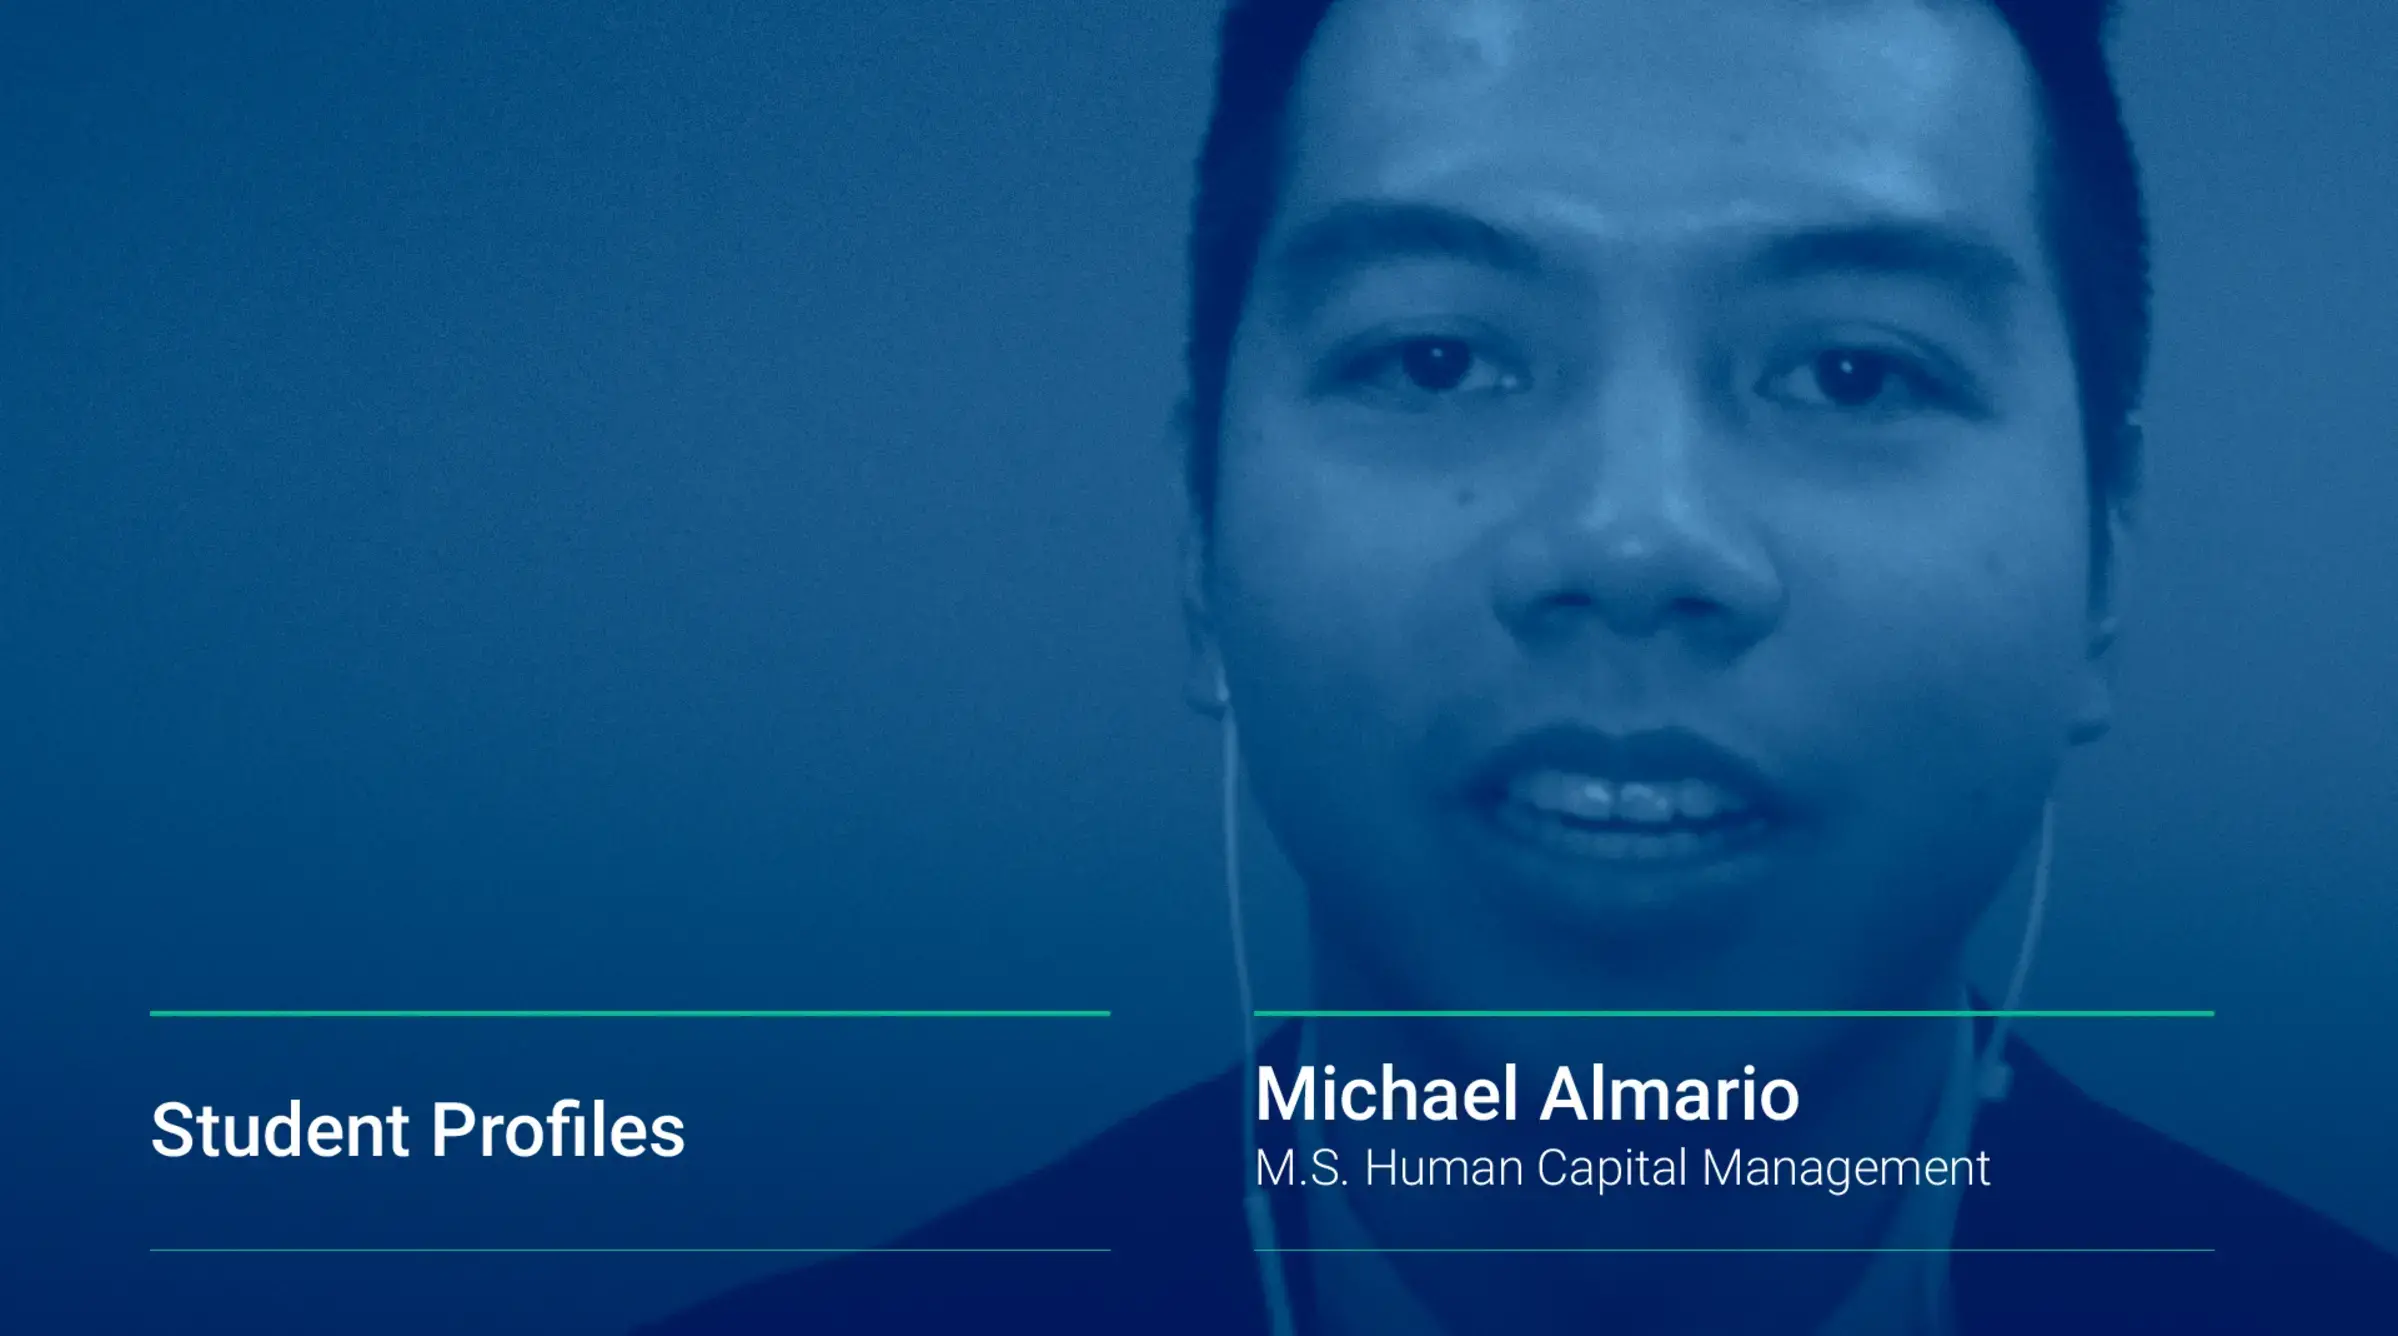 A still from Michael Almario's video interview about the Human Capital Management master's program.